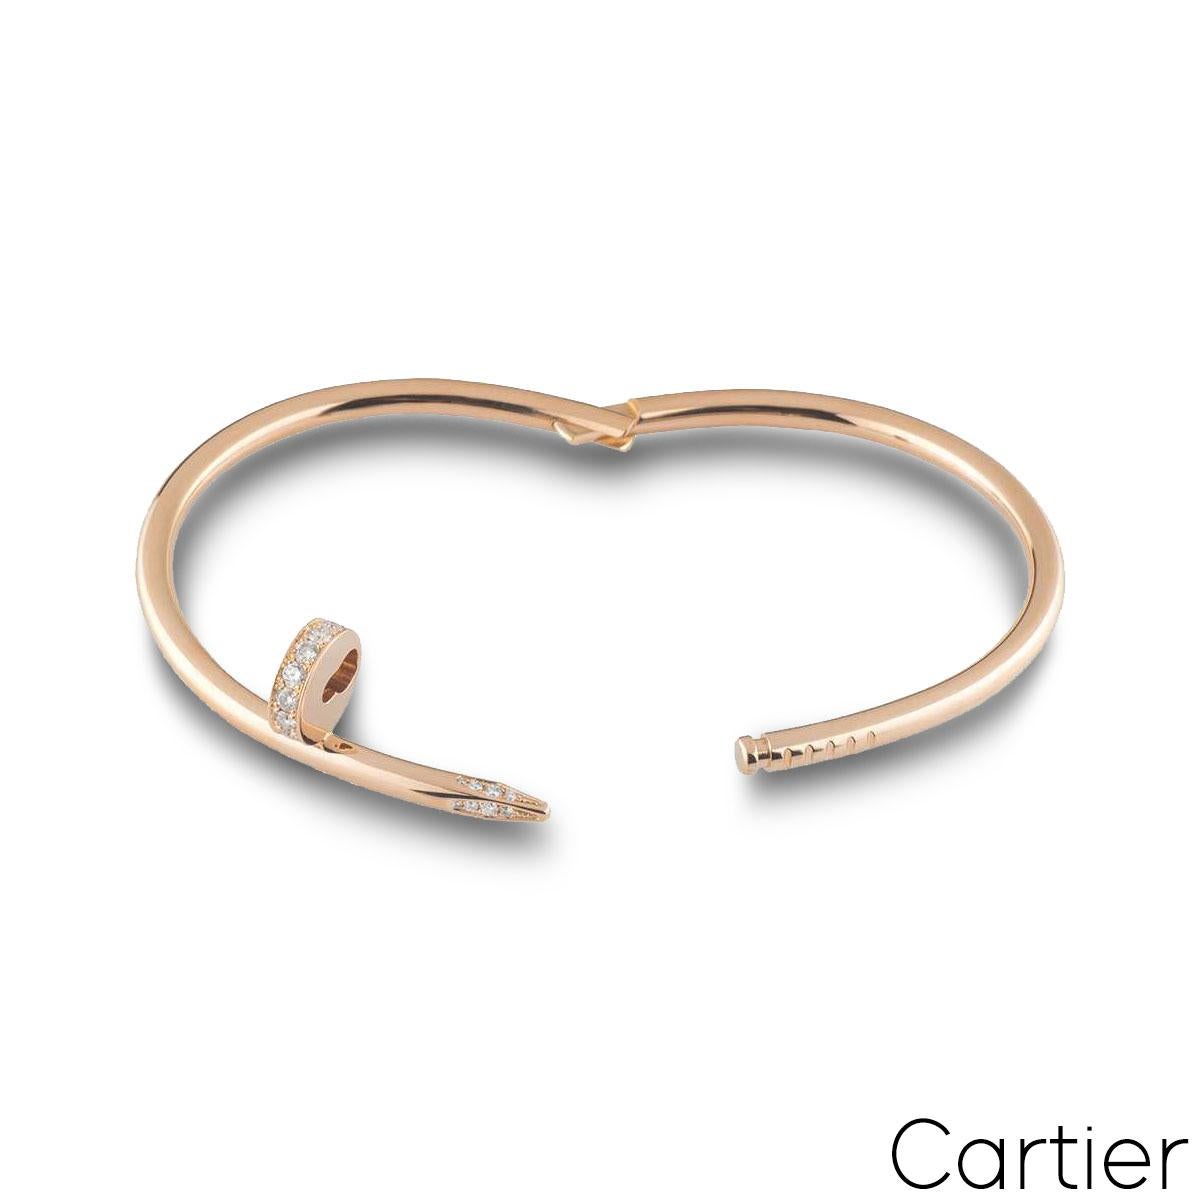 An iconic, 18k rose gold Cartier diamond bracelet from the Juste un Clou collection. The bracelet is in the style of a nail and features 27 round brilliant cut pave diamonds, set in the head and tip totalling 0.54ct. The diamonds are predominantly F